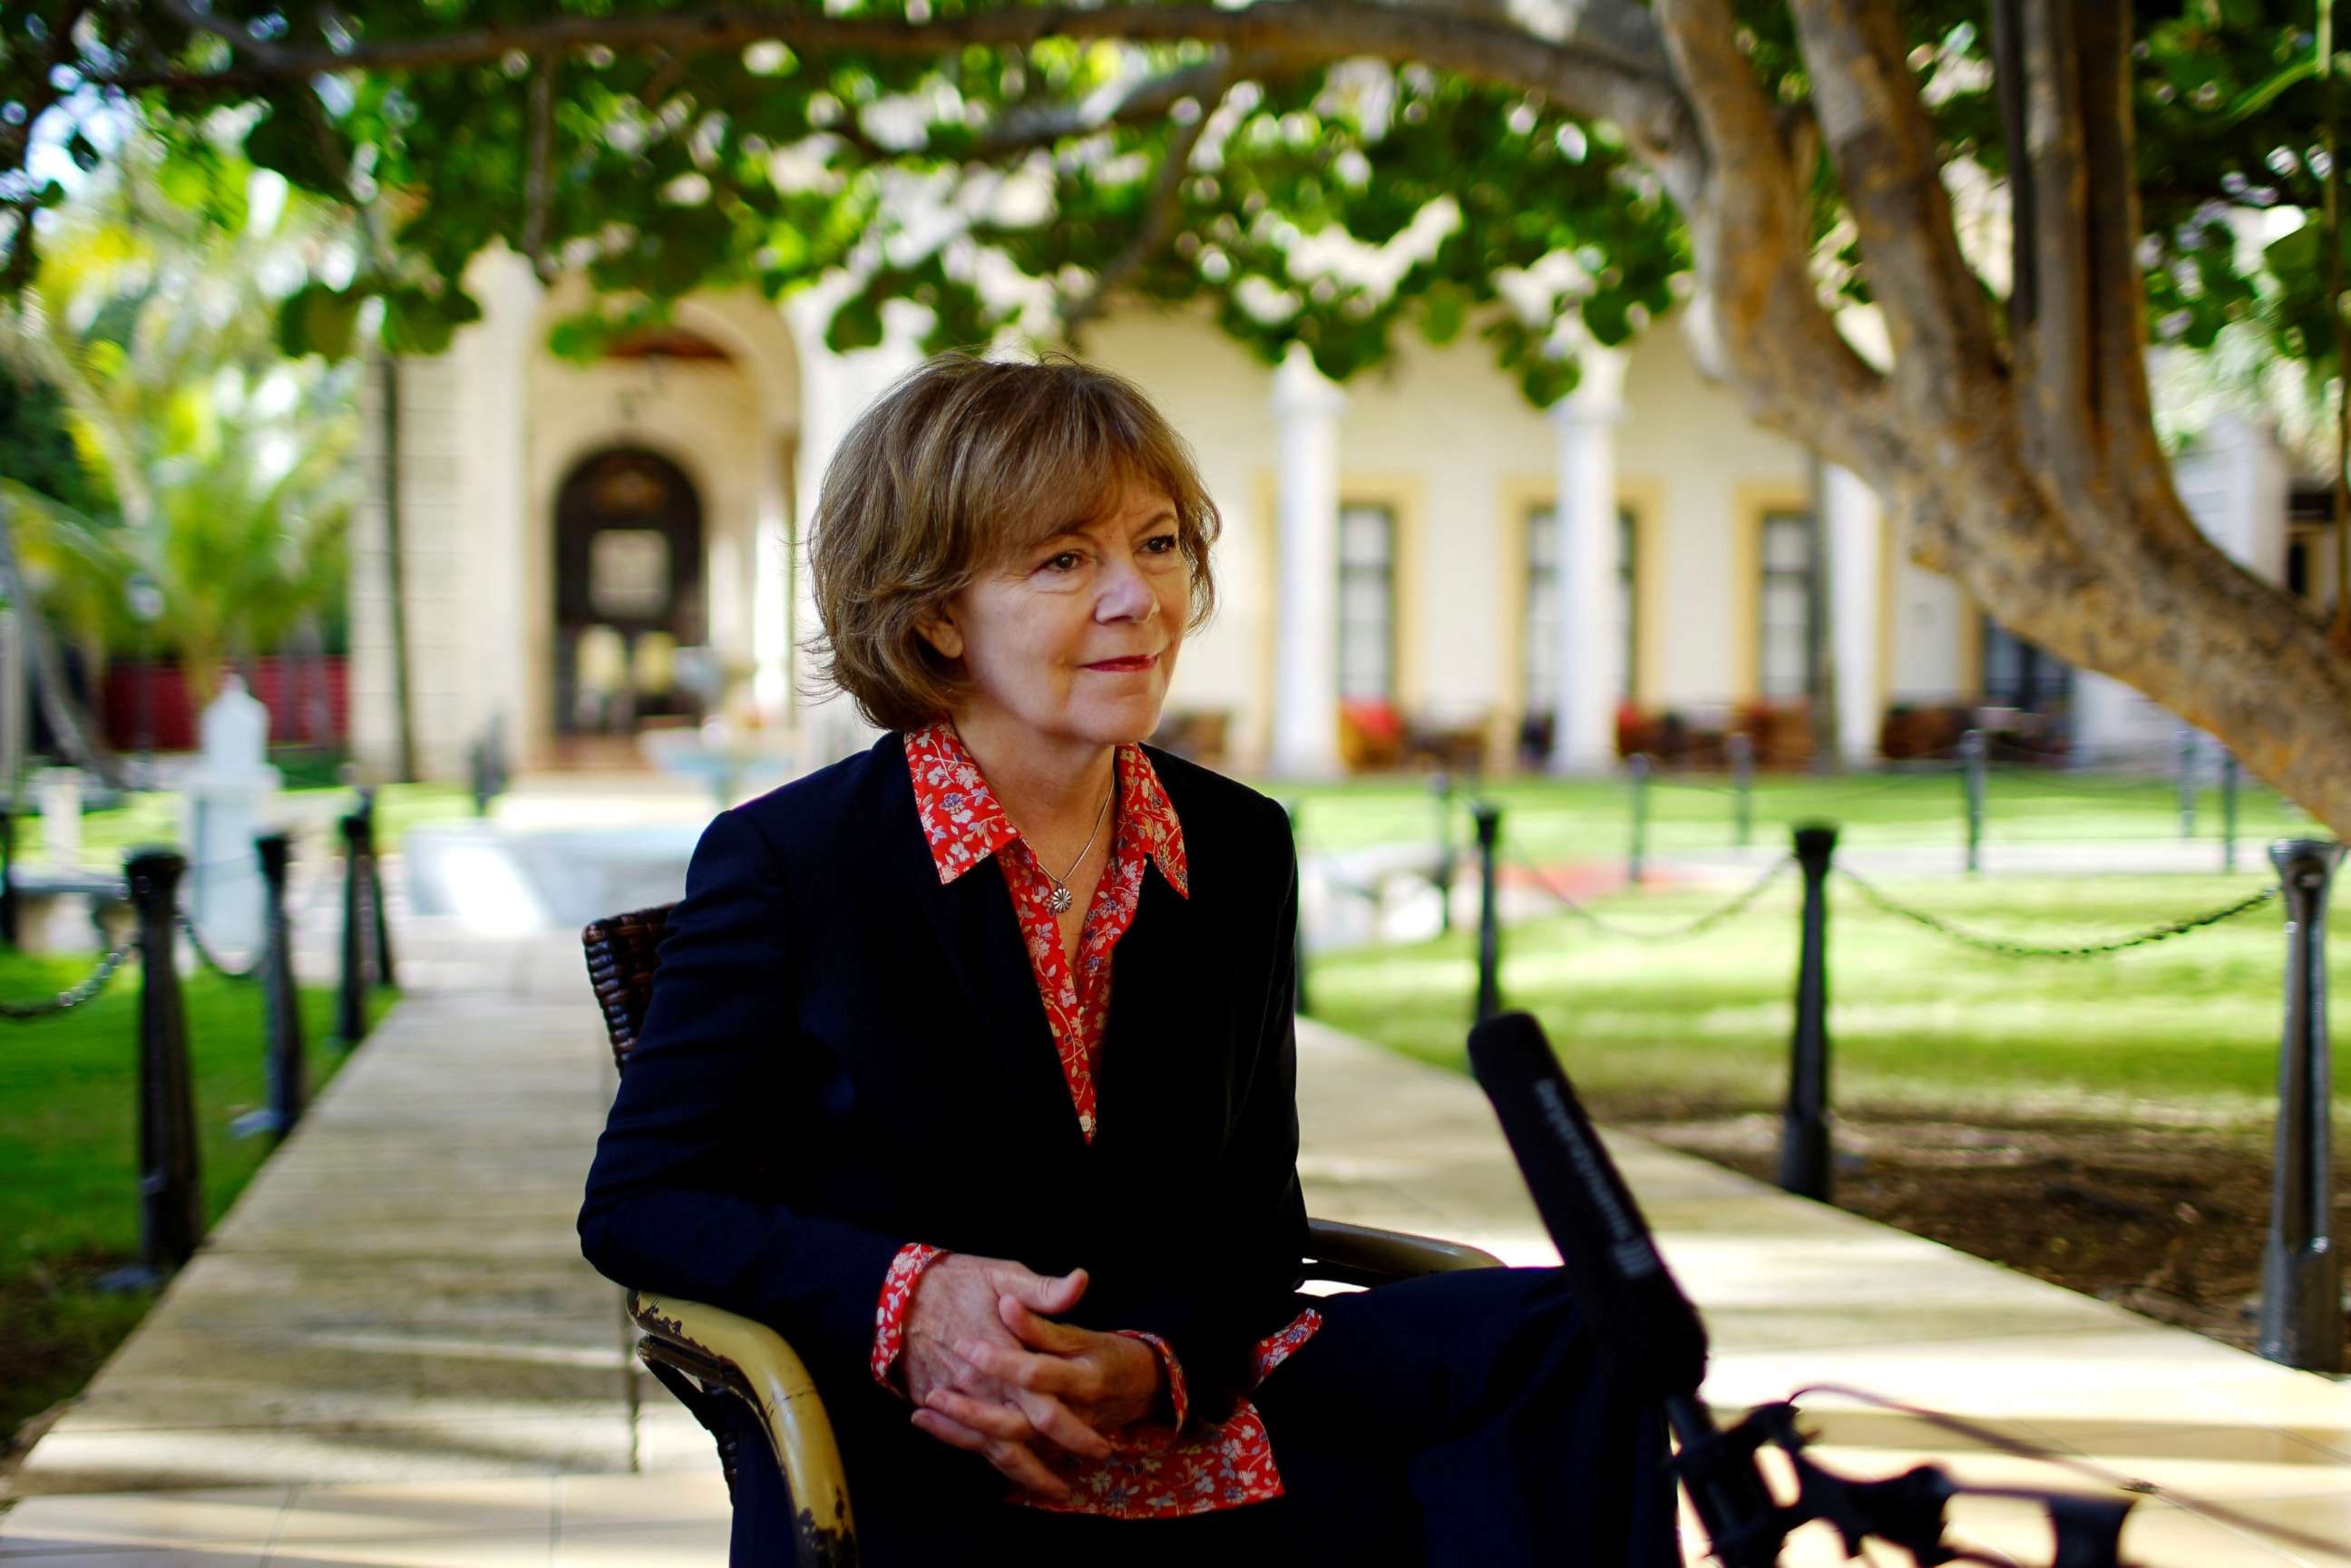 PHOTO: Minnesota Lieutenant Governor Tina Smith speaks during an interview at a hotel in Havana, Cuba, June 22, 2017.